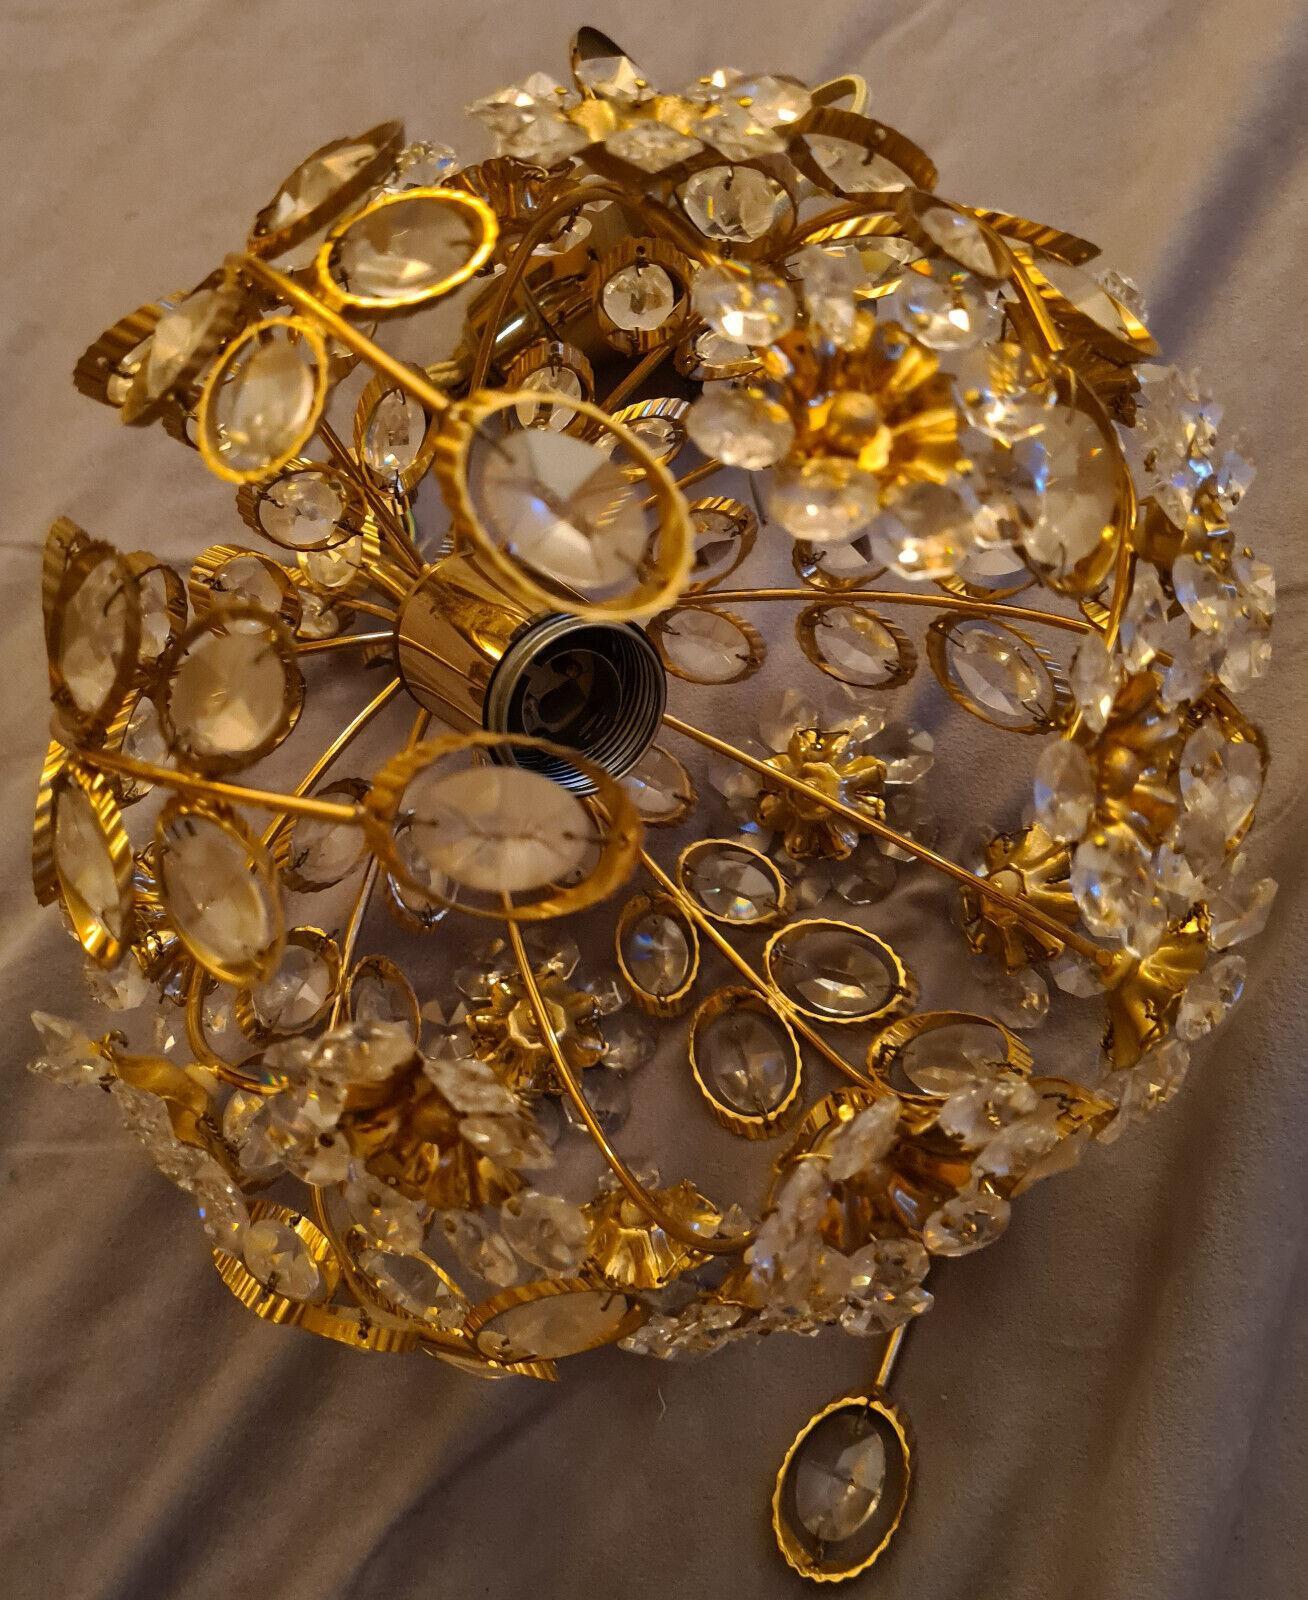 1960s Mid Century Modern 24K w/Cut Crystal Round Floral Pendant Fixtyre by Palwa In Good Condition For Sale In Opa Locka, FL